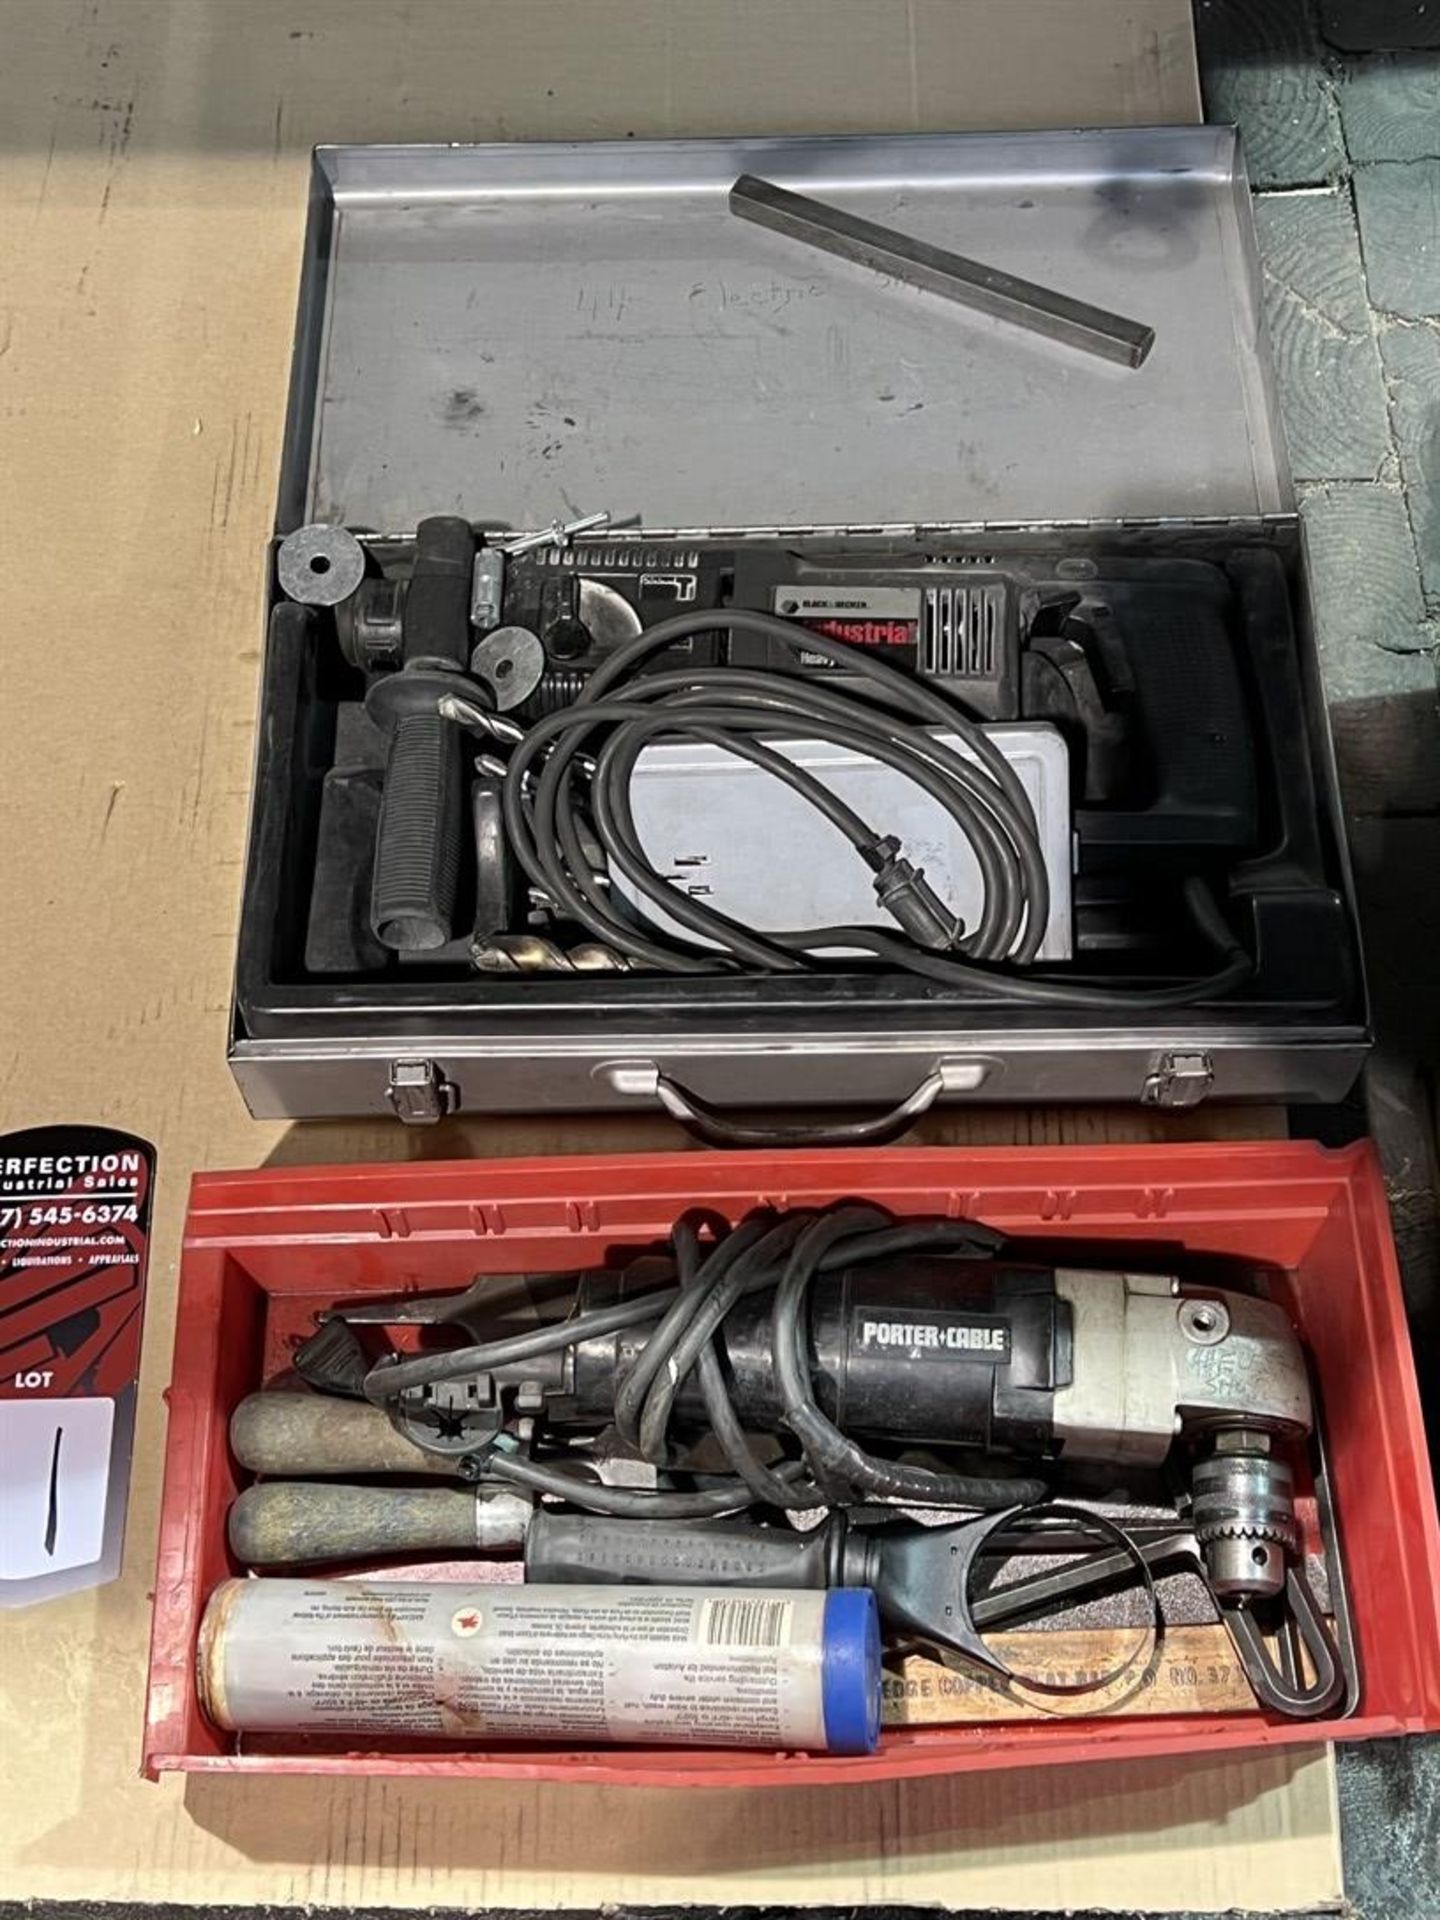 Lot Comprising MILWAUKEE 1/2" Magnum Shooter, B & D 5054 3/4" Rotary Hammer Drill, PORTER CABLE 7557 - Image 2 of 3